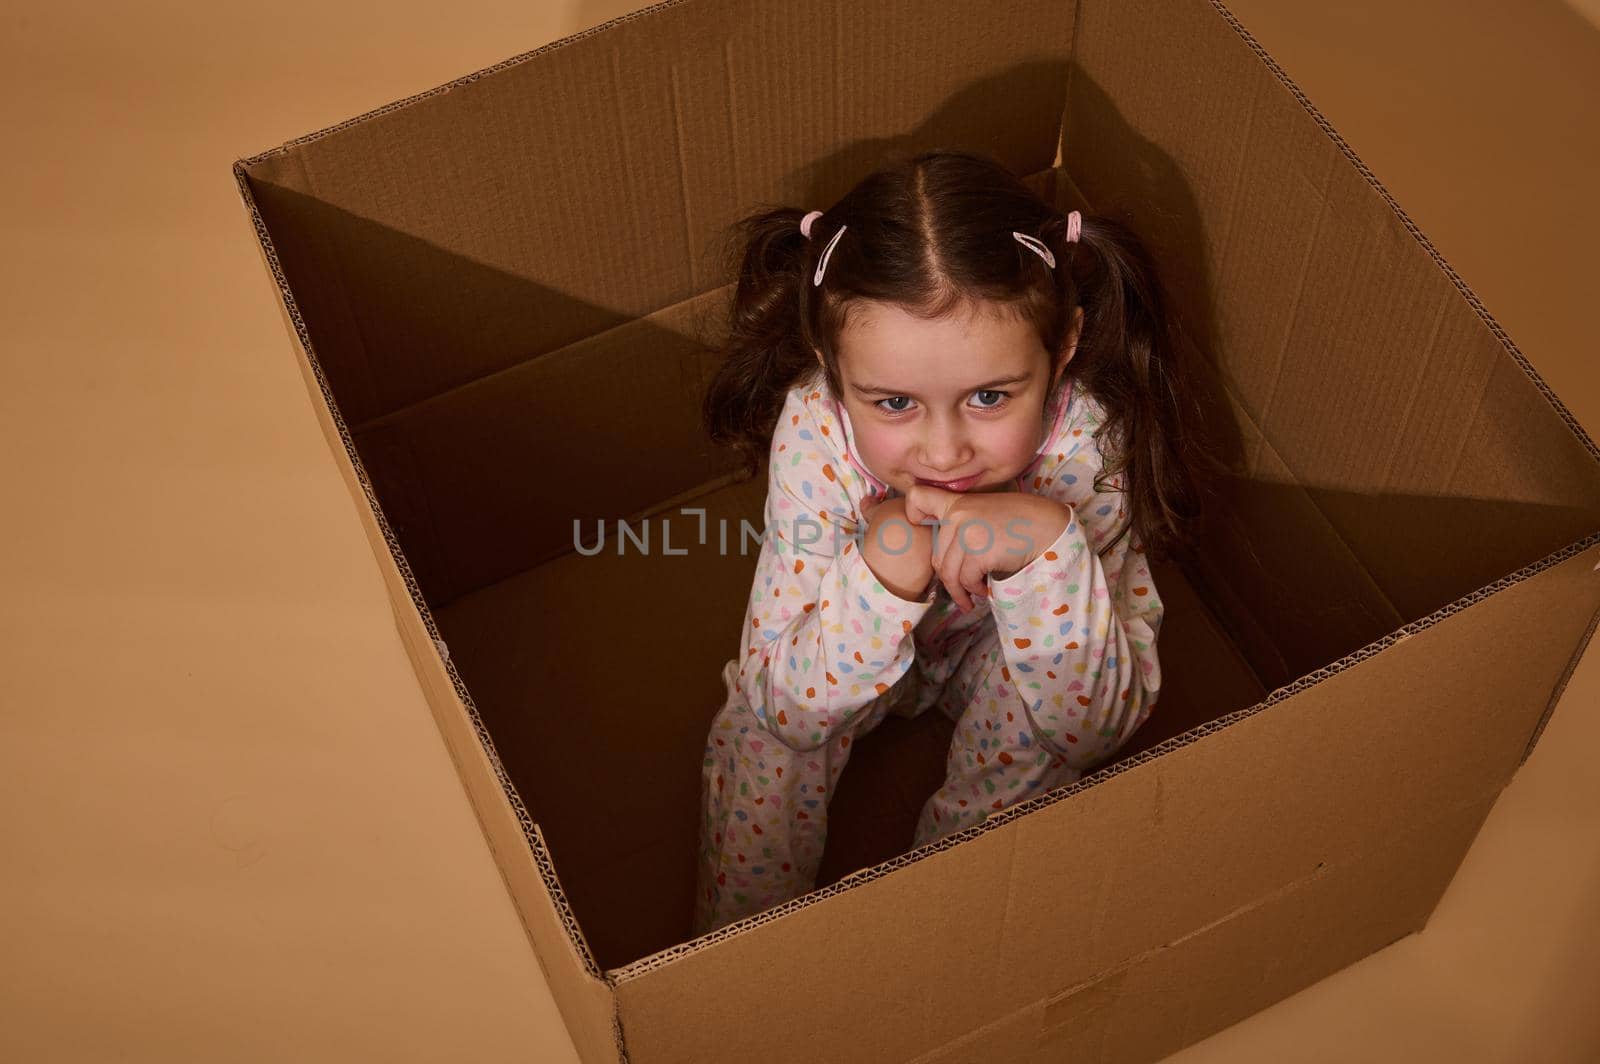 Studio shot of a sly beautiful little girl looking mysteriously at the camera while inside a cardboard box. Emotional studio portrait on a beige background with space for advertising by artgf